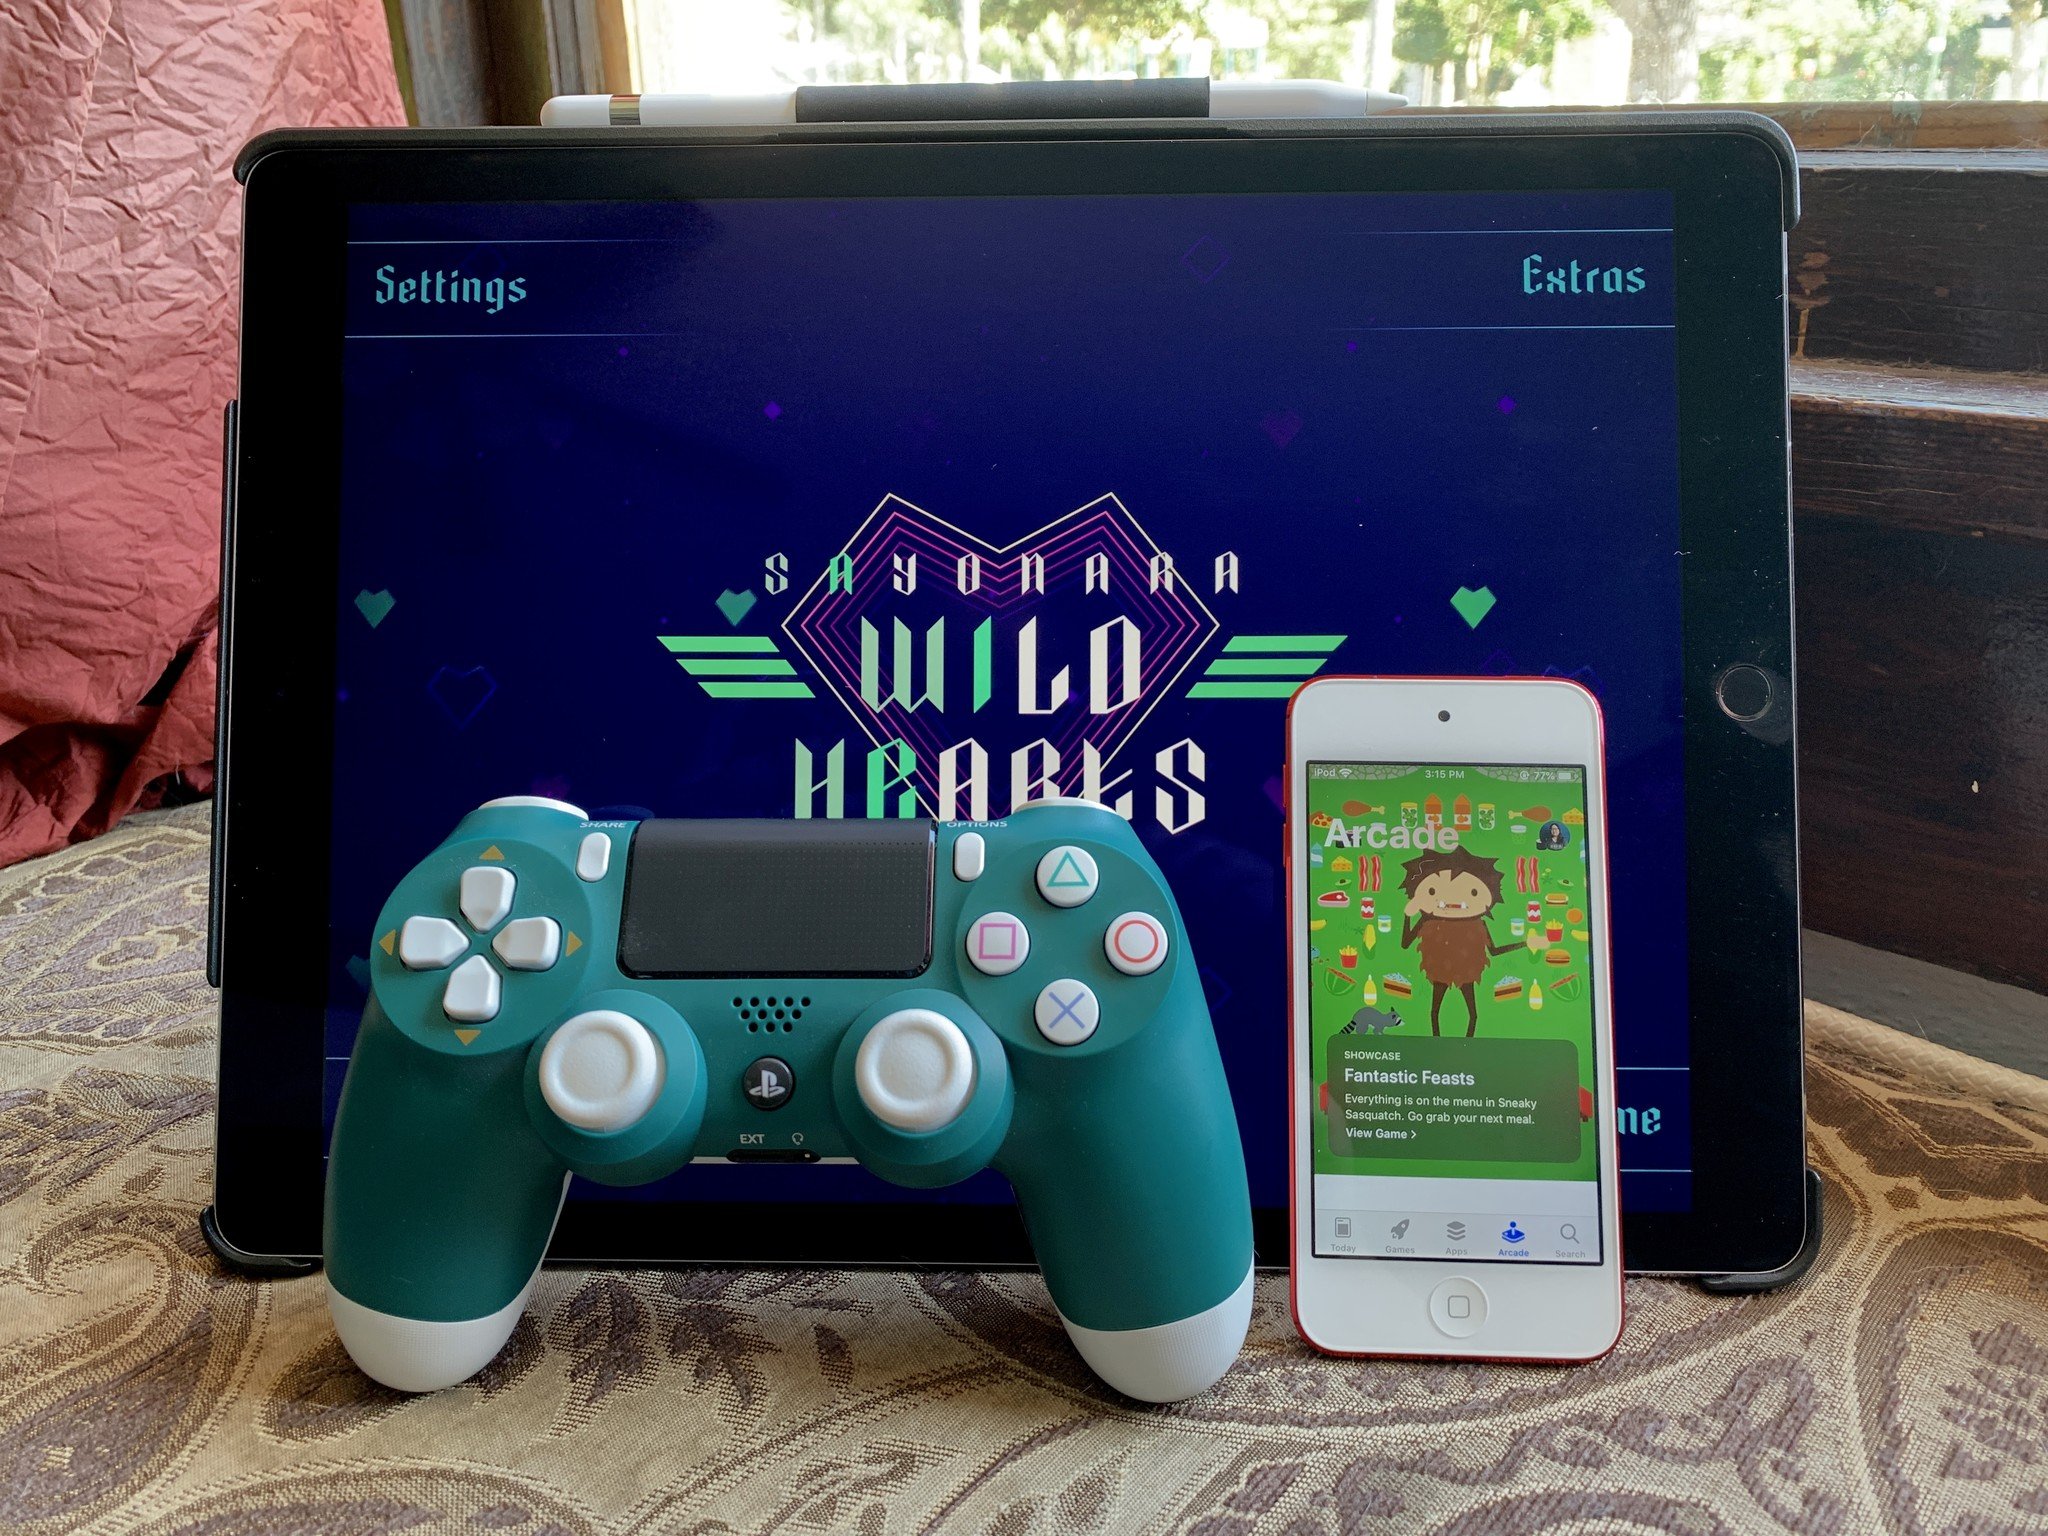 DualShock 4 controllers pair very nicely with the Apple Arcade experience